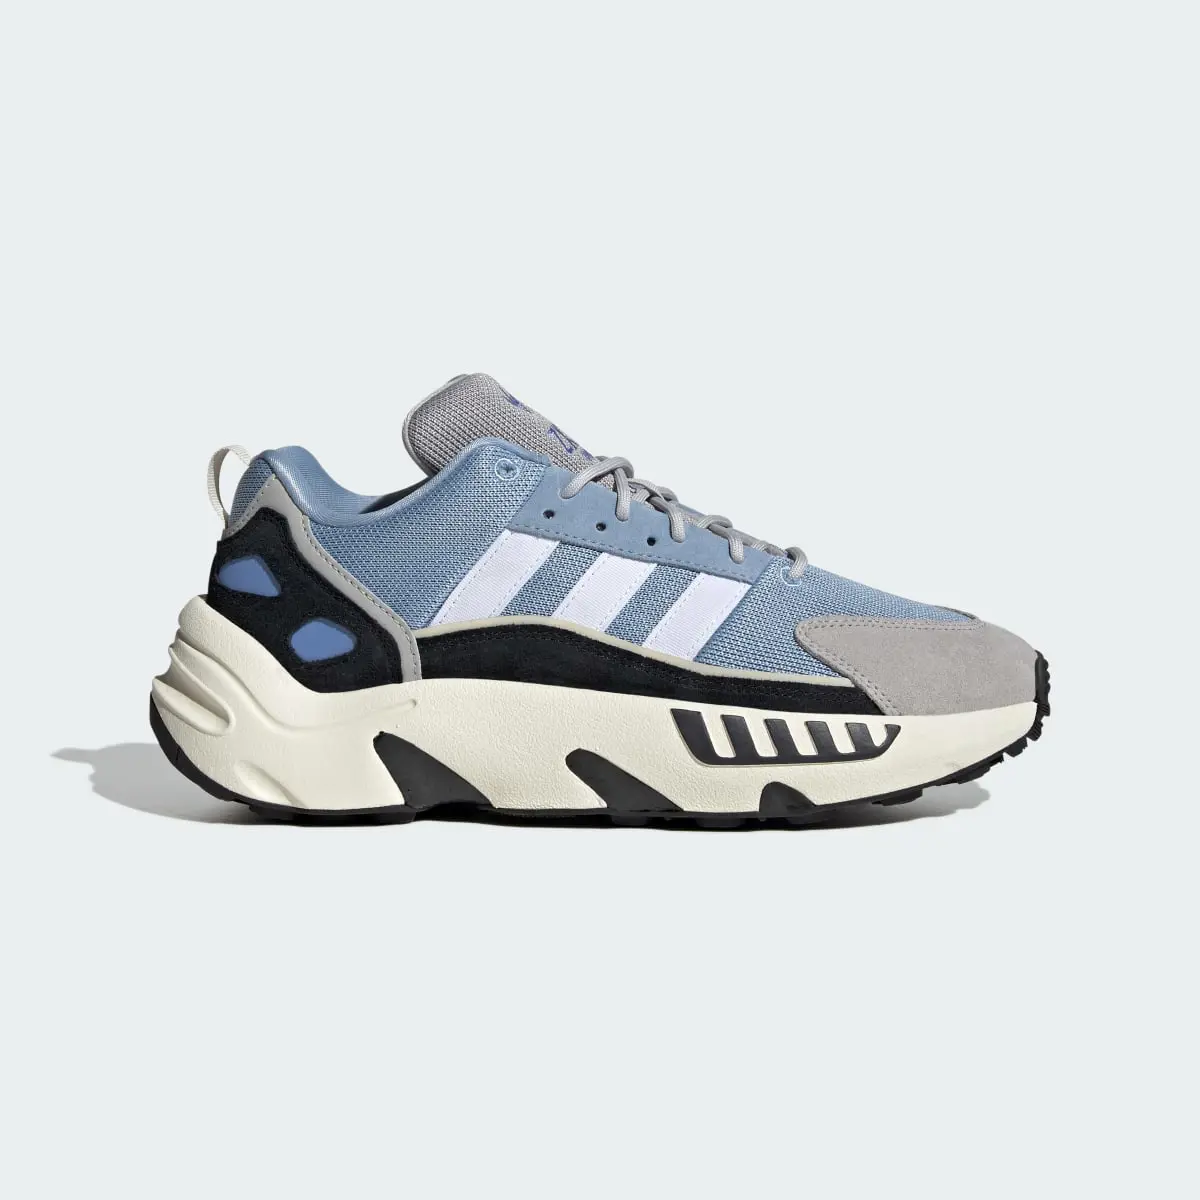 Adidas ZX 22 BOOST Shoes. 2